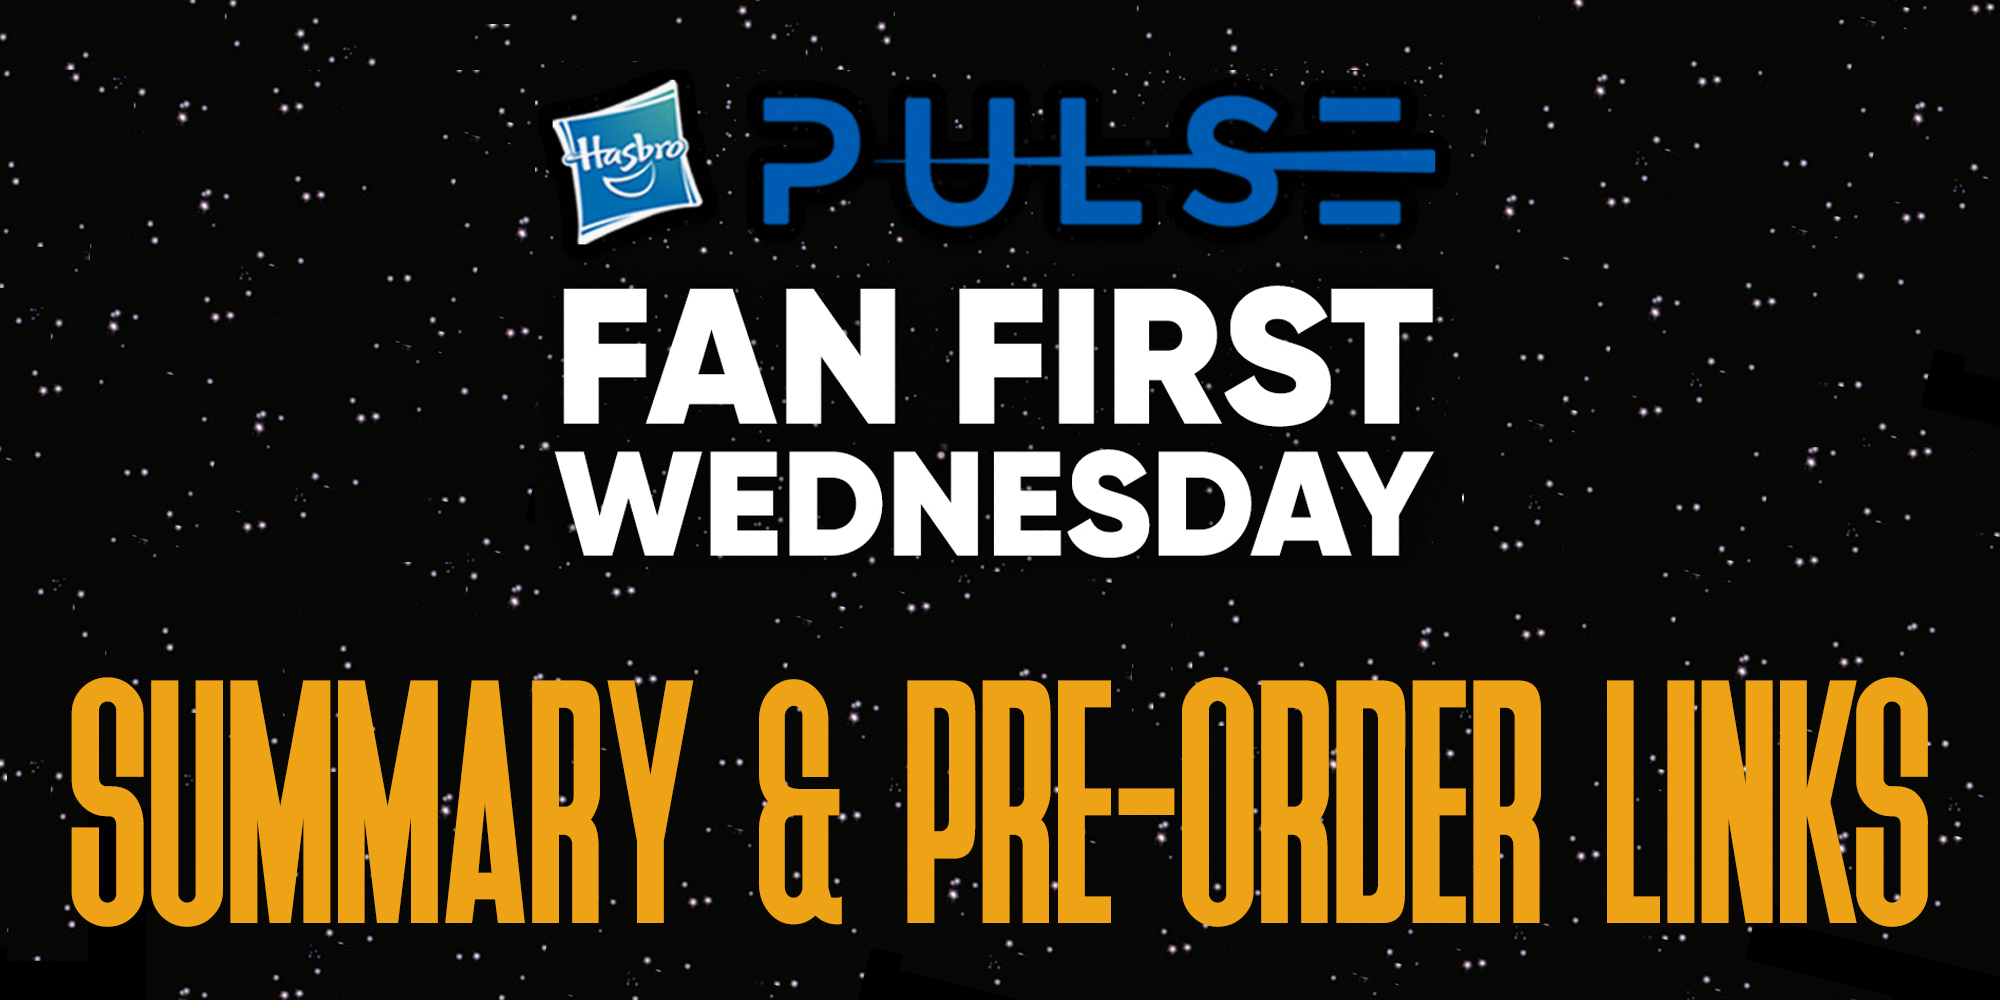 A Summary Of Today's Fan First Wednesday!